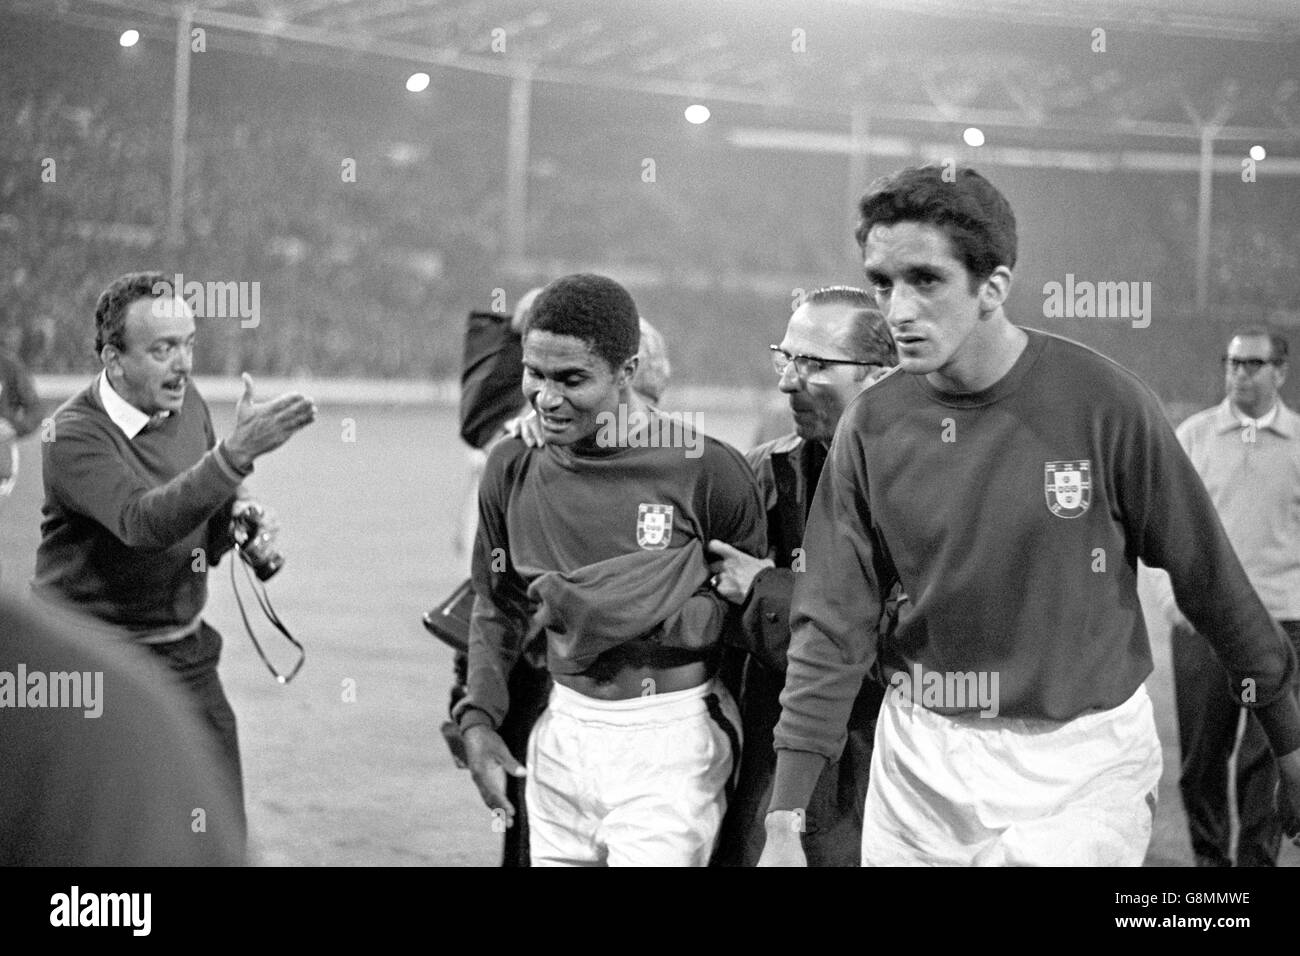 Soccer - World Cup England 1966 - Semi Final - Portugal v England - Wembley Stadium. Portugal's Eusebio (l) and Jose Torres (r) trudge dejectedly from the pitch after their team's 2-1 defeat Stock Photo